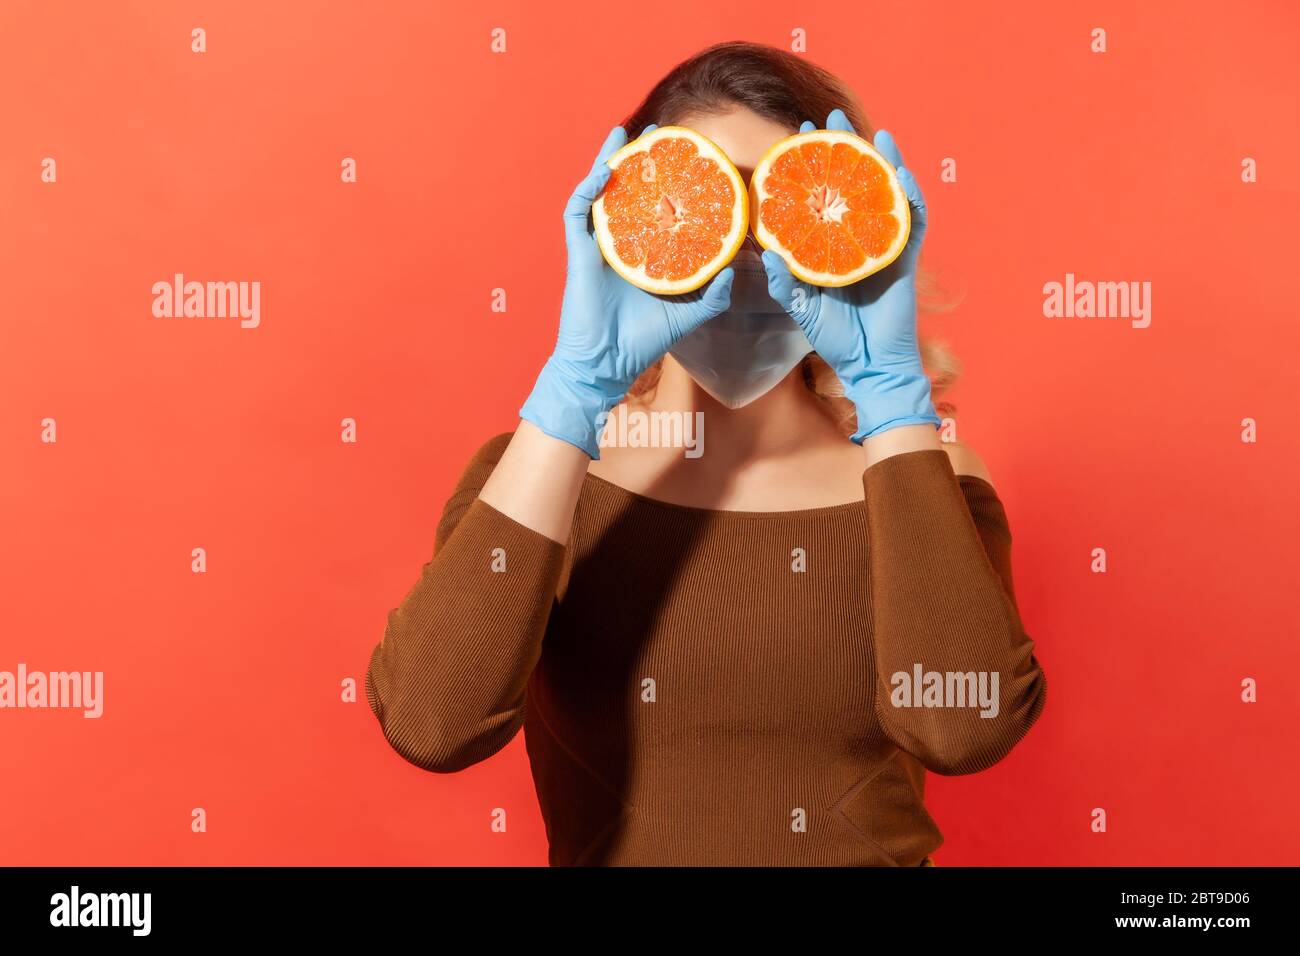 Woman in protective gloves and face mask covering eyes with orange fresh fruits, natural vitamins for immune system and flu treatment, healthy nutriti Stock Photo